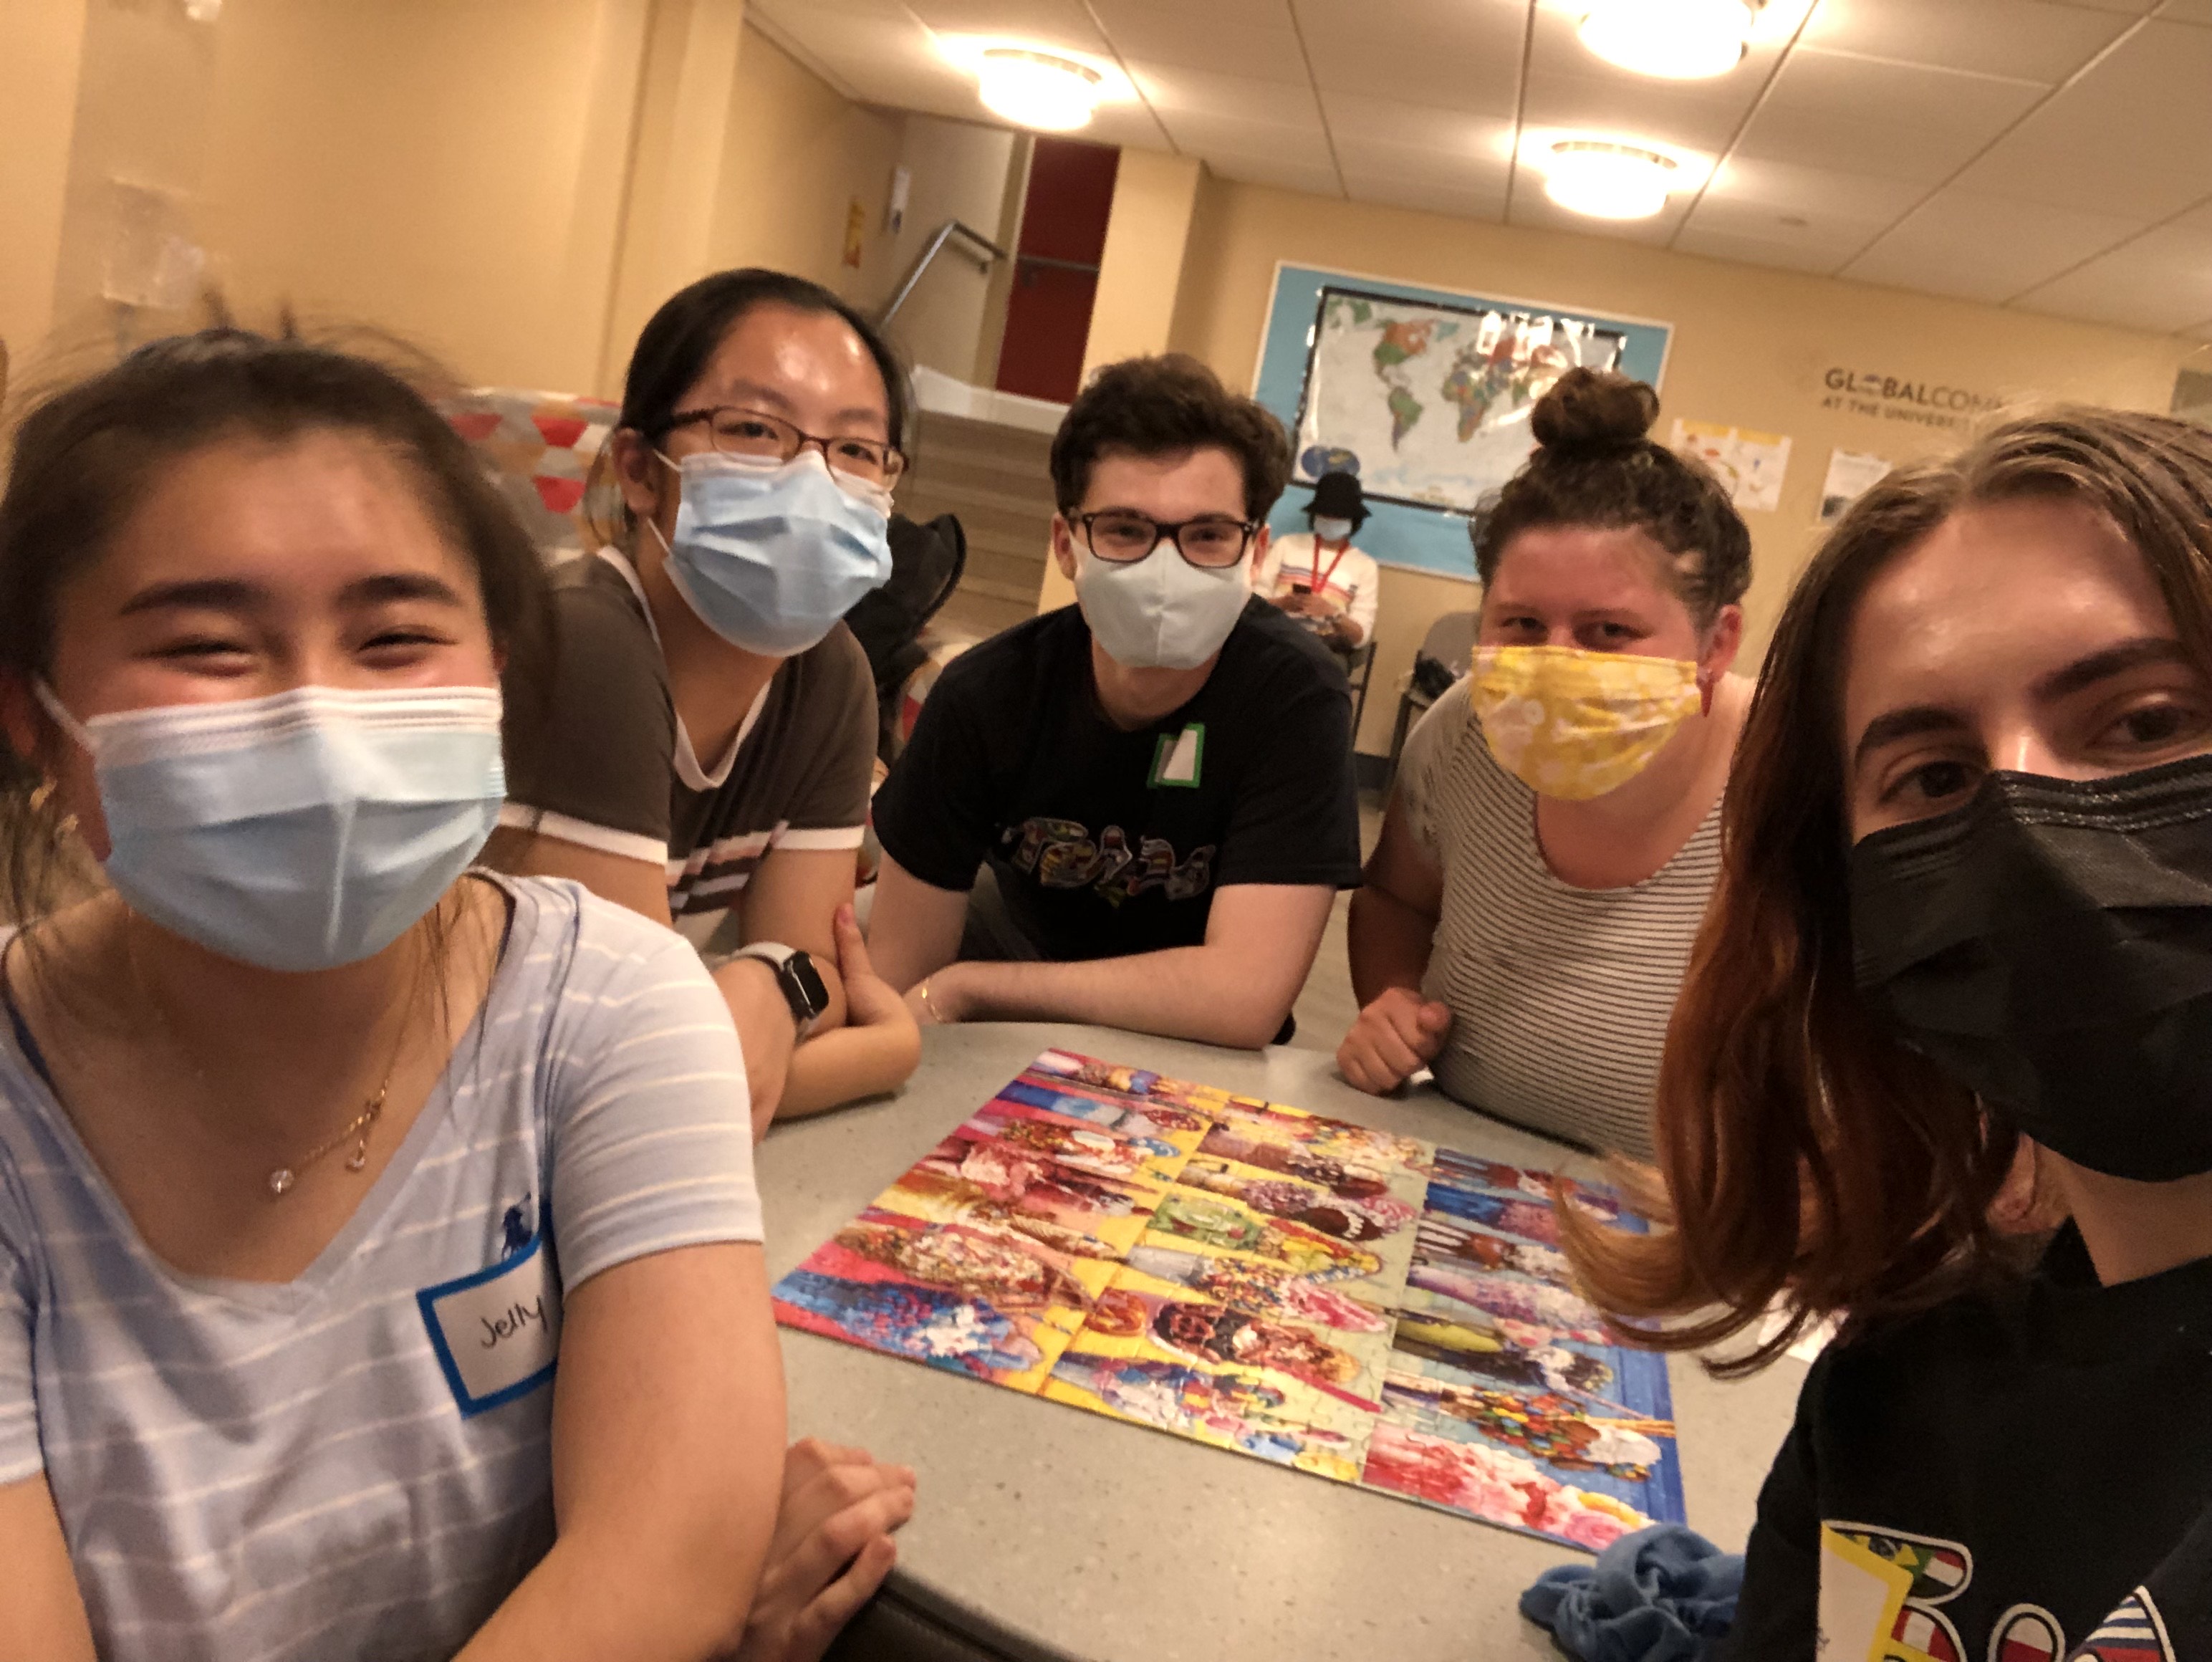 students surrounding a completed jigsaw puzzle with masks on